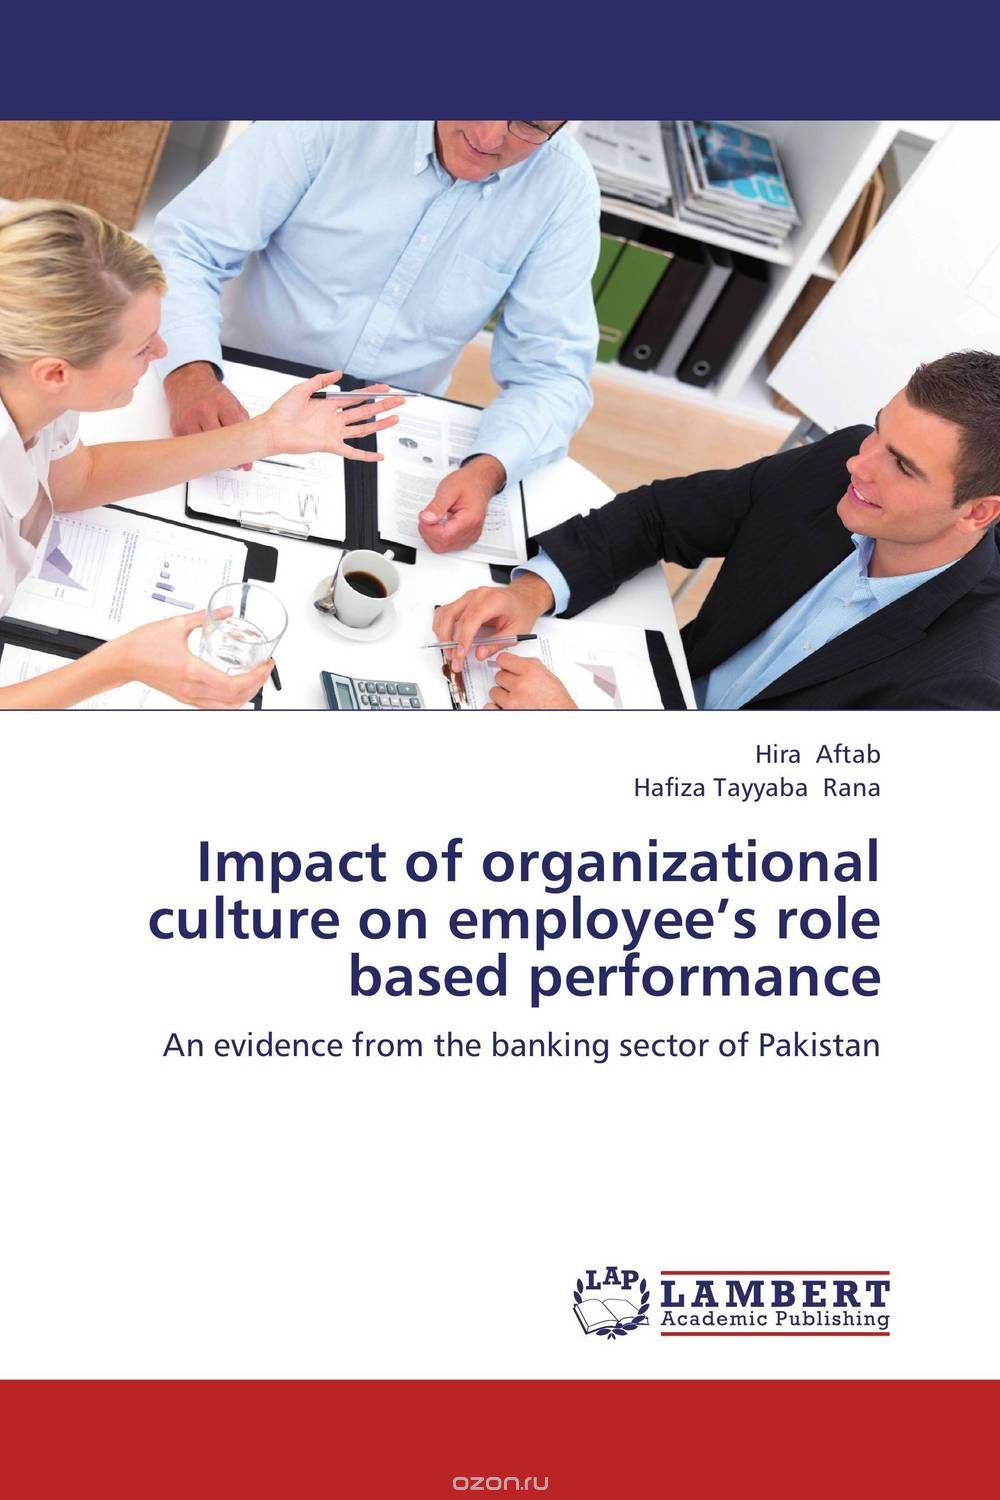 Impact of organizational culture on employee’s role based performance